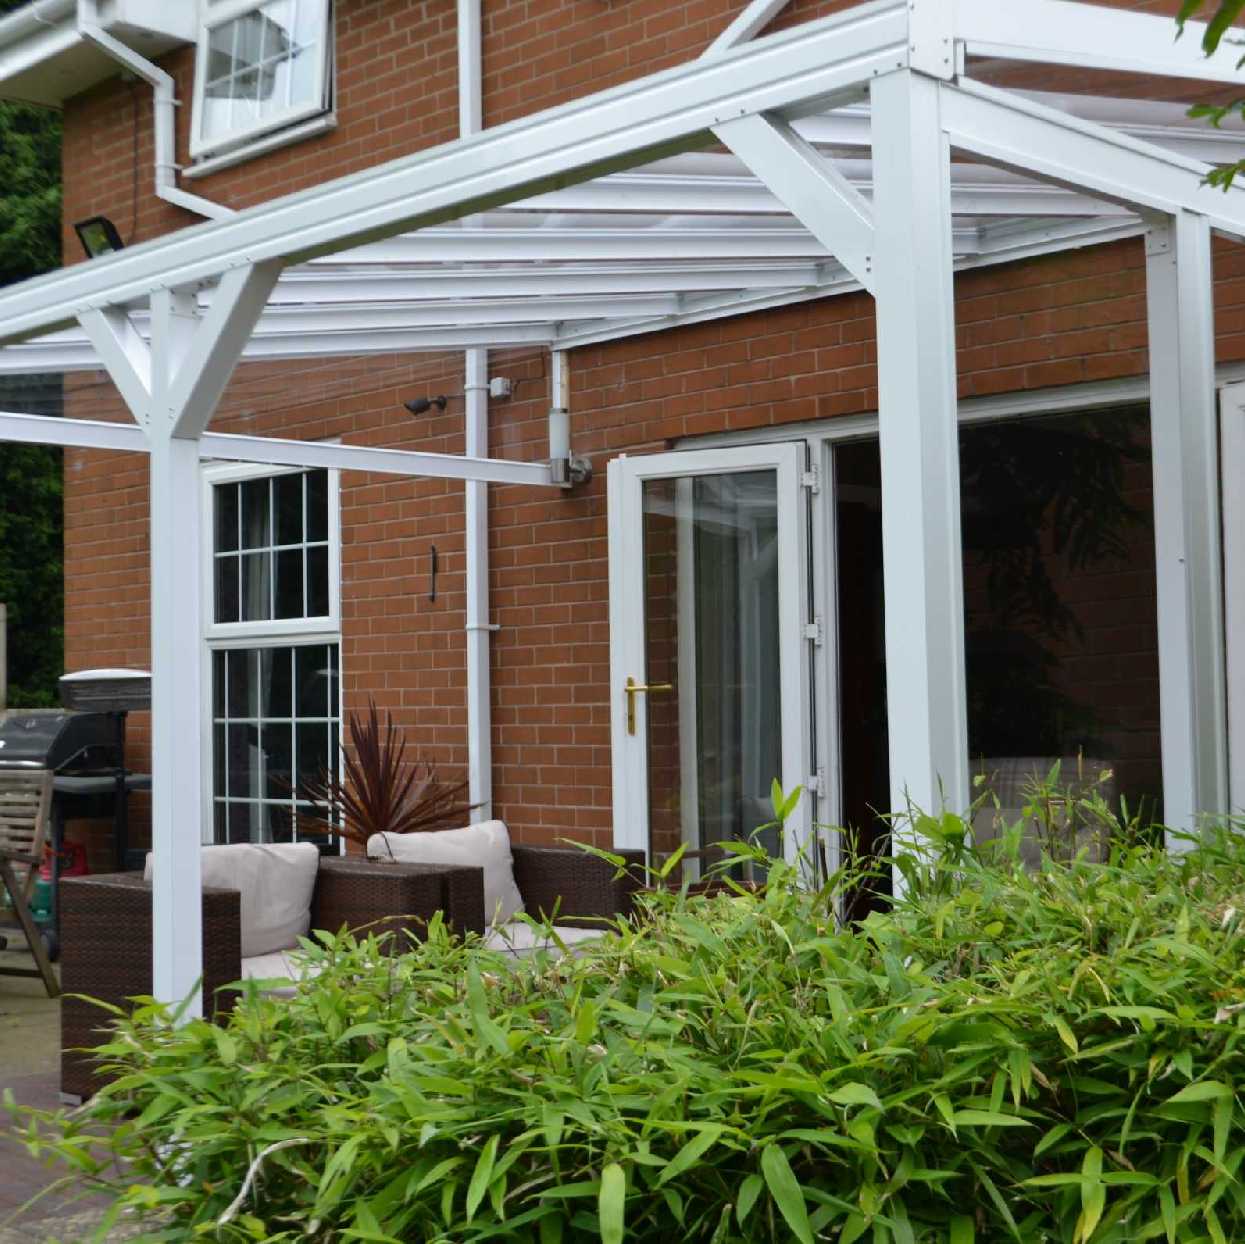 Omega Smart Lean-To Canopy, White with 6mm Glass Clear Plate Polycarbonate Glazing - 9.1m (W) x 3.5m (P), (5) Supporting Posts from Omega Build